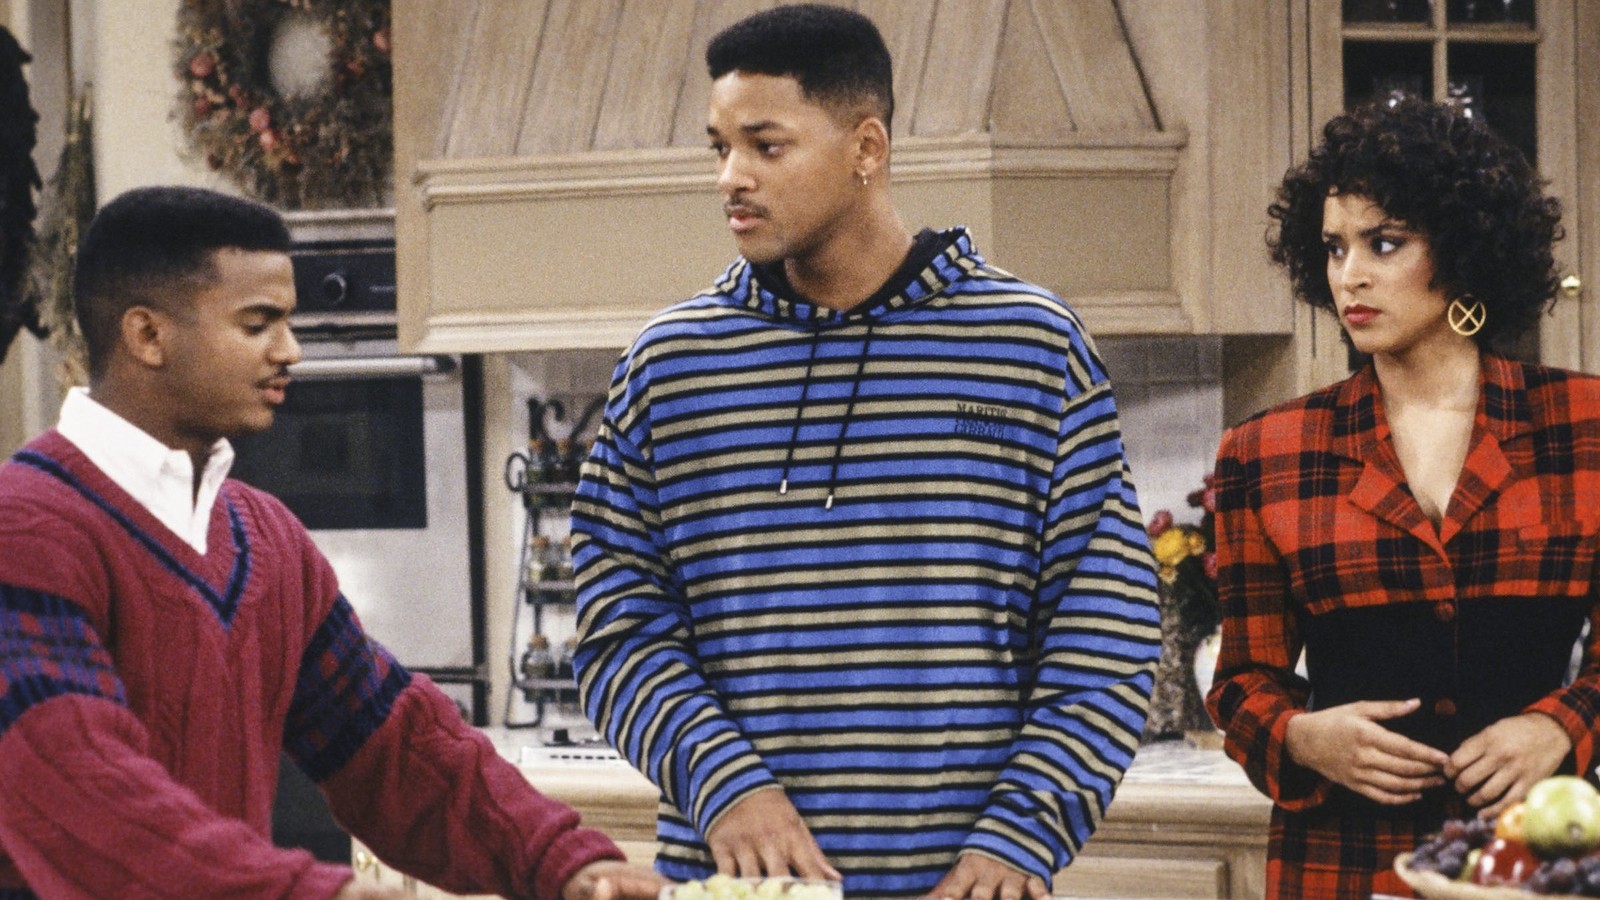 My Identity Via Fresh Prince of Bel-Air,' 20 Years the Will Smith Sitcom Ended - The Atlantic